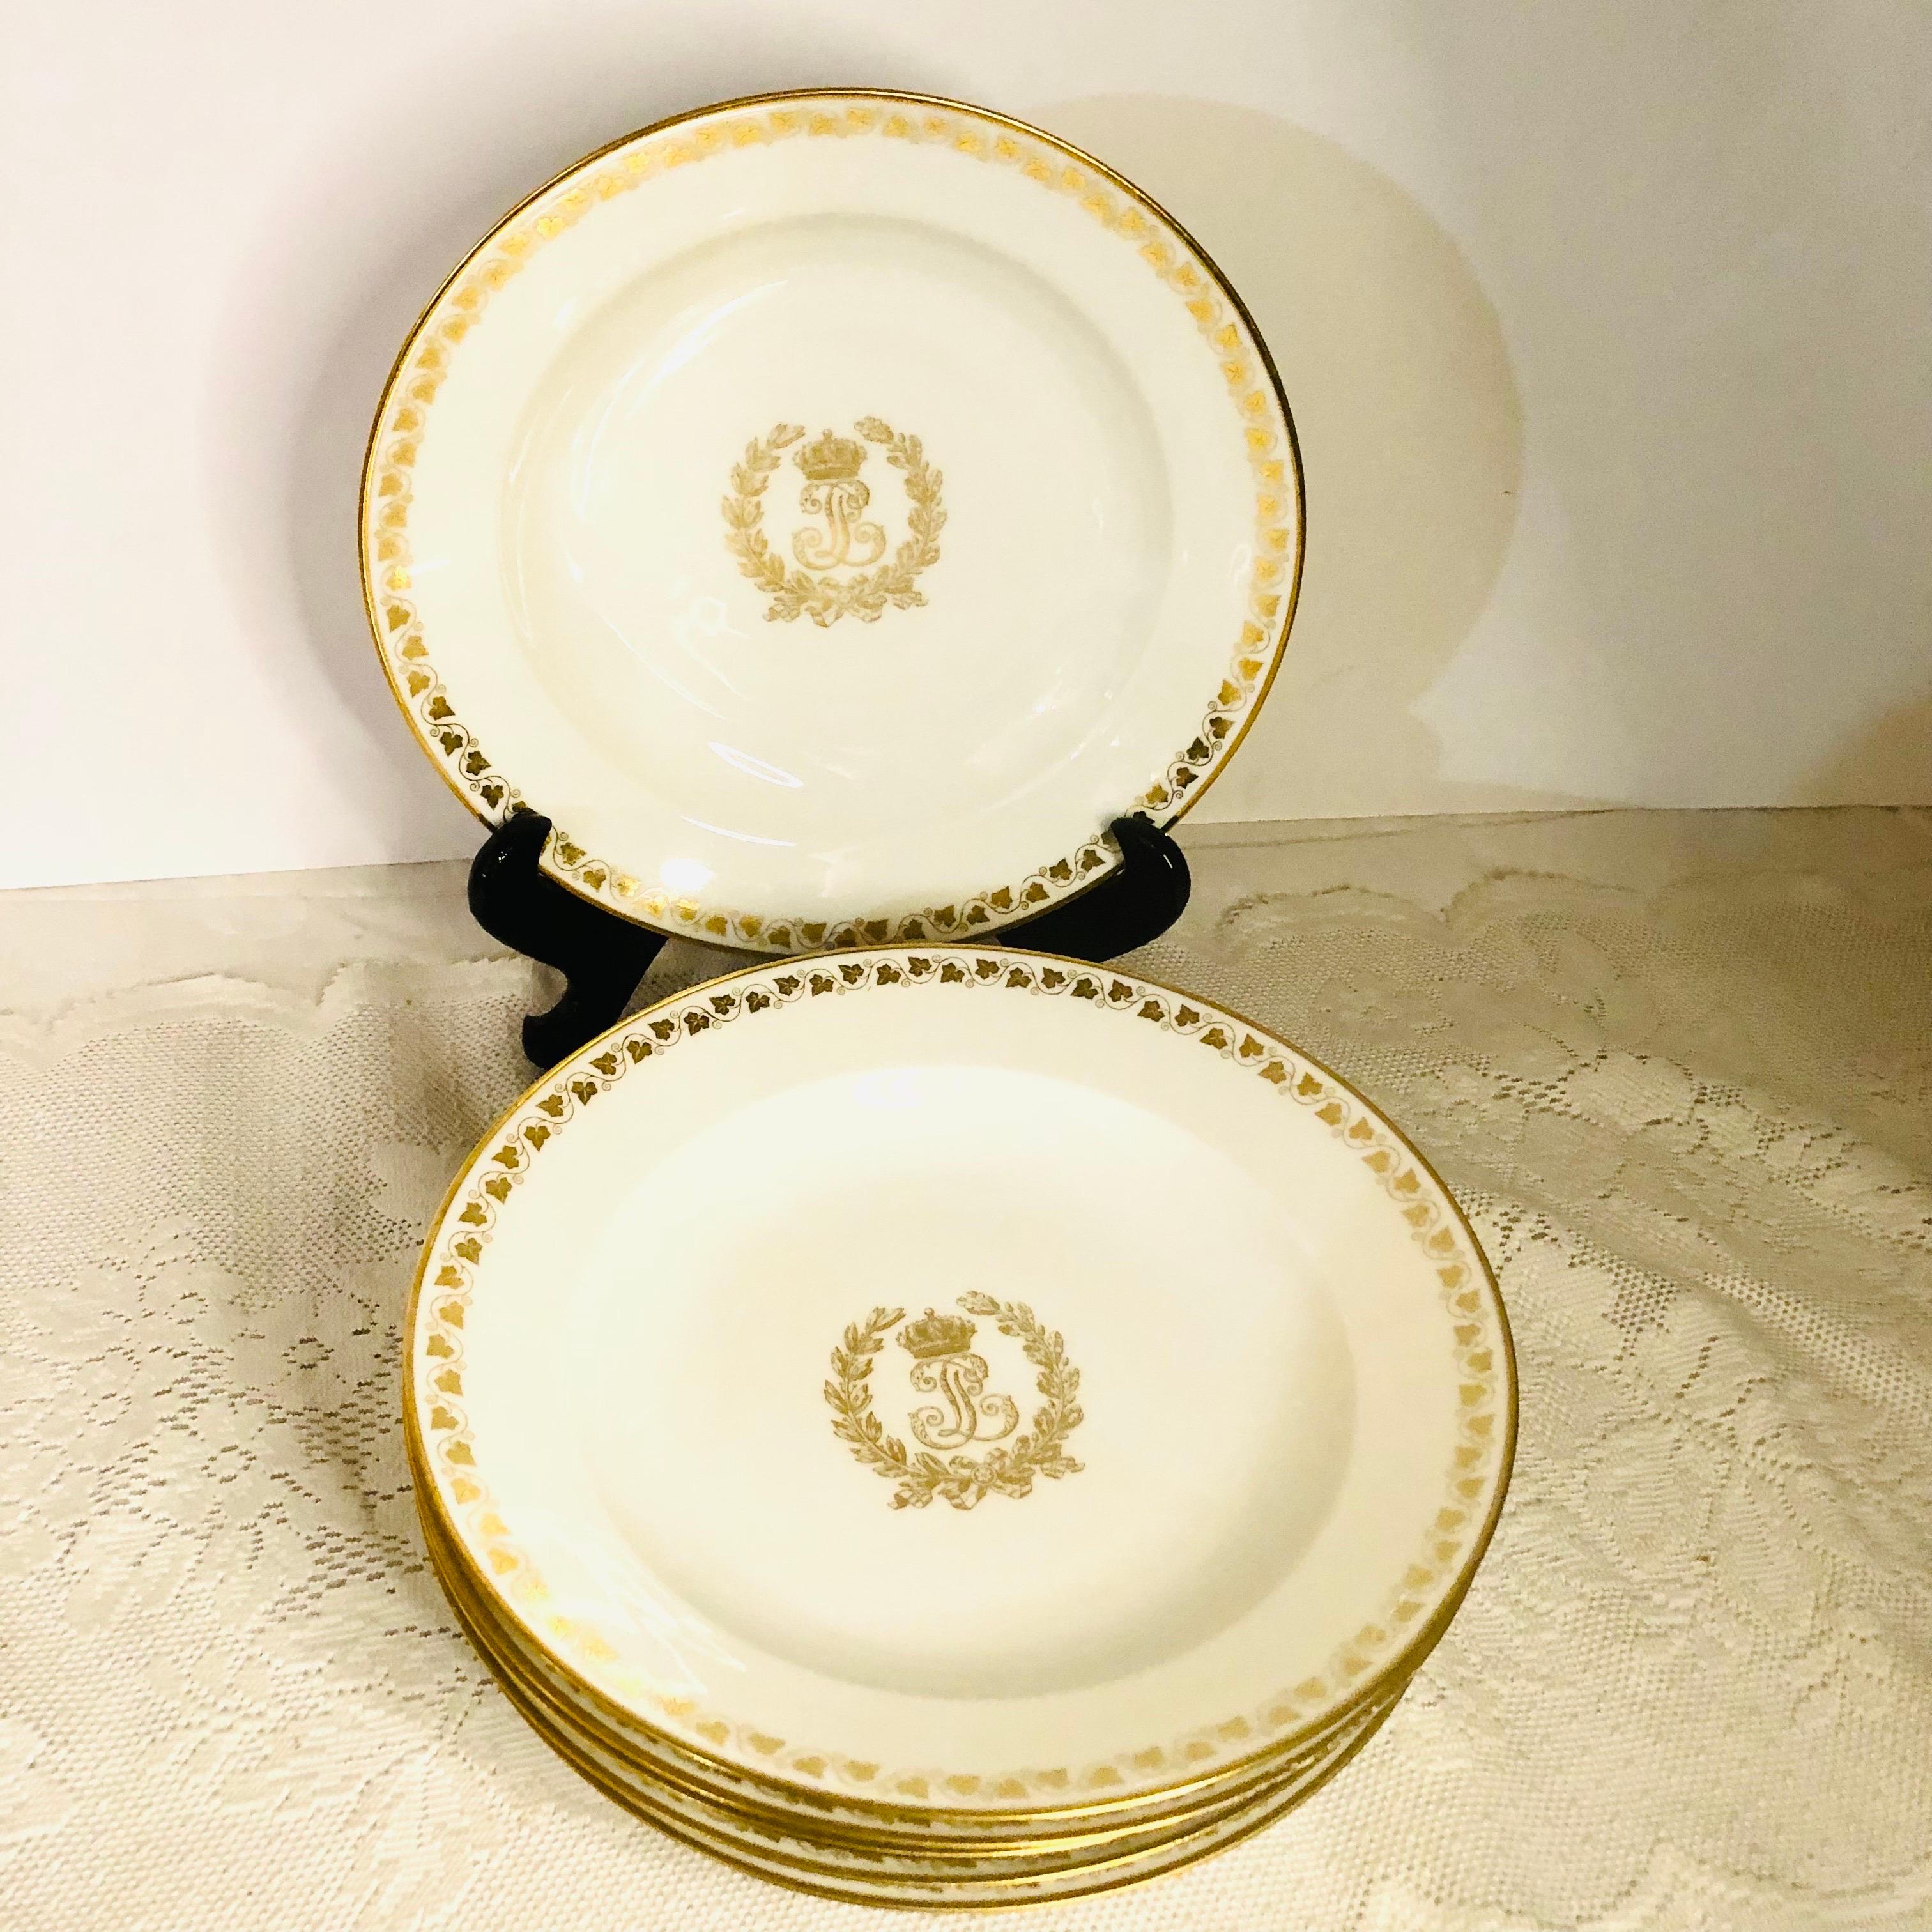 This is a rare set of six Sevres wide rim soup bowls with white ground having an elegant central gold monogram for King Louis Philippe. The gold monogram for King Louis Phillippe is surrounded by a gold foliate leaf wreath. Above the monogram is a